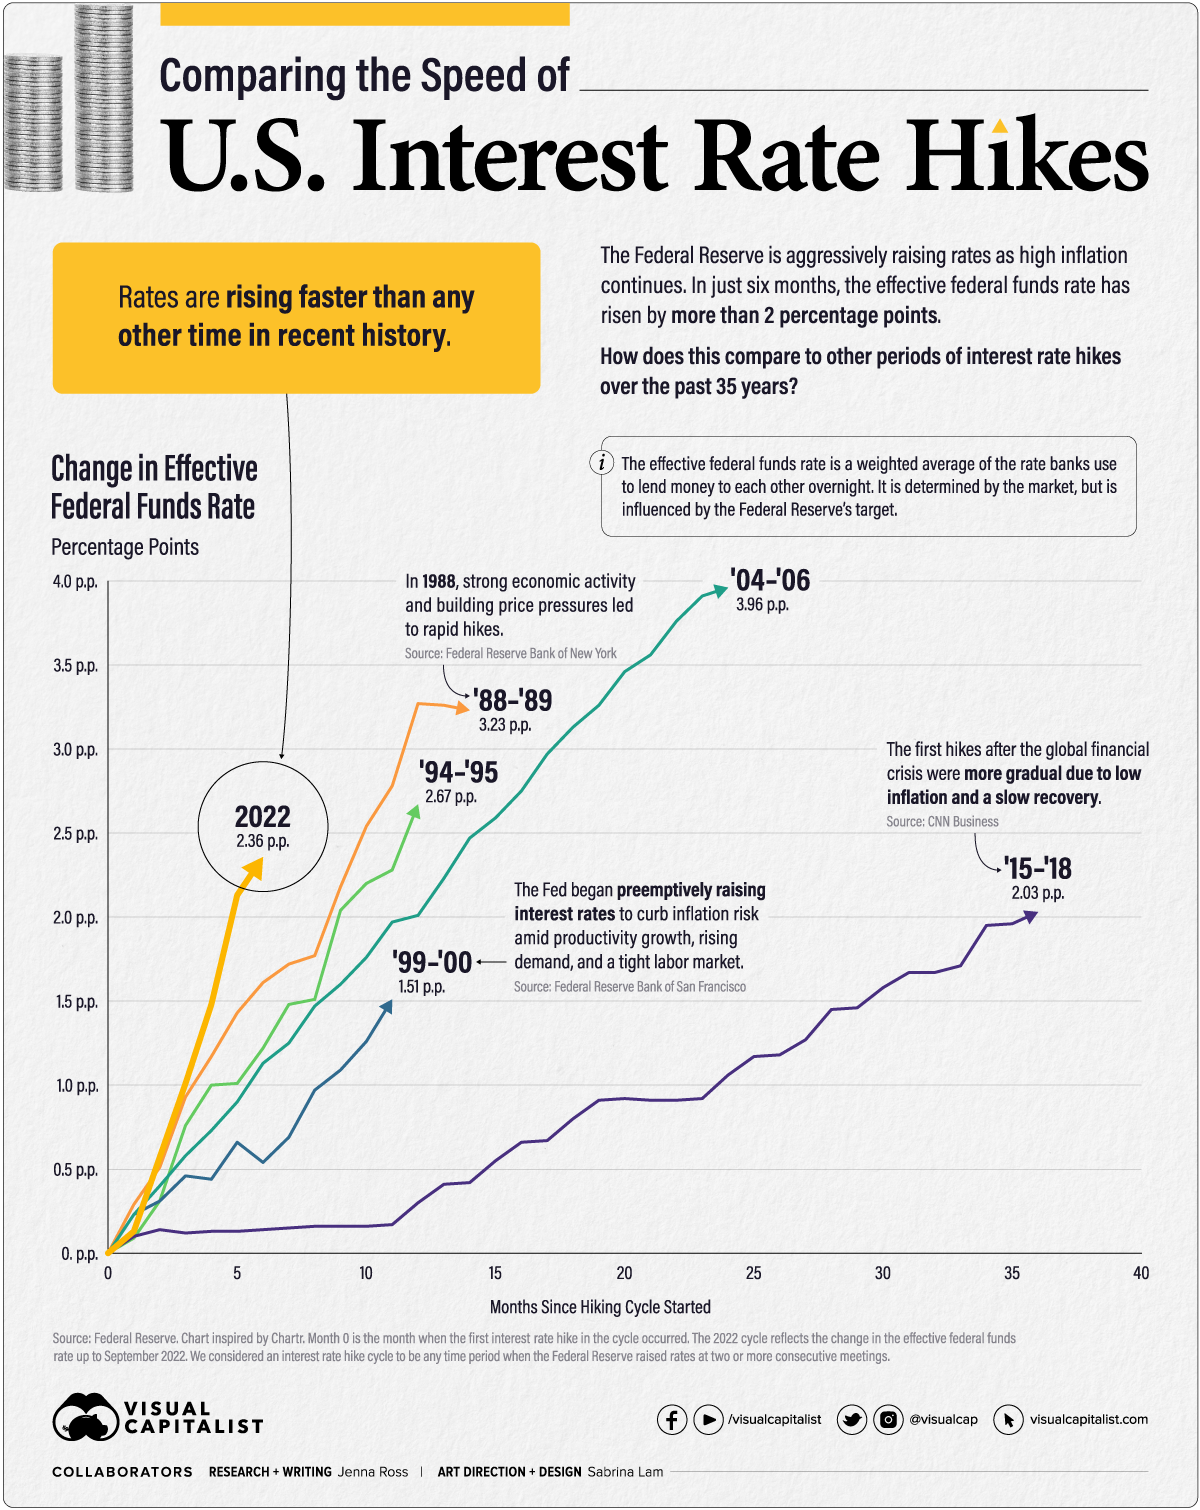 Comparing the Speed of U.S. Interest Rate Hikes (1988-2022)